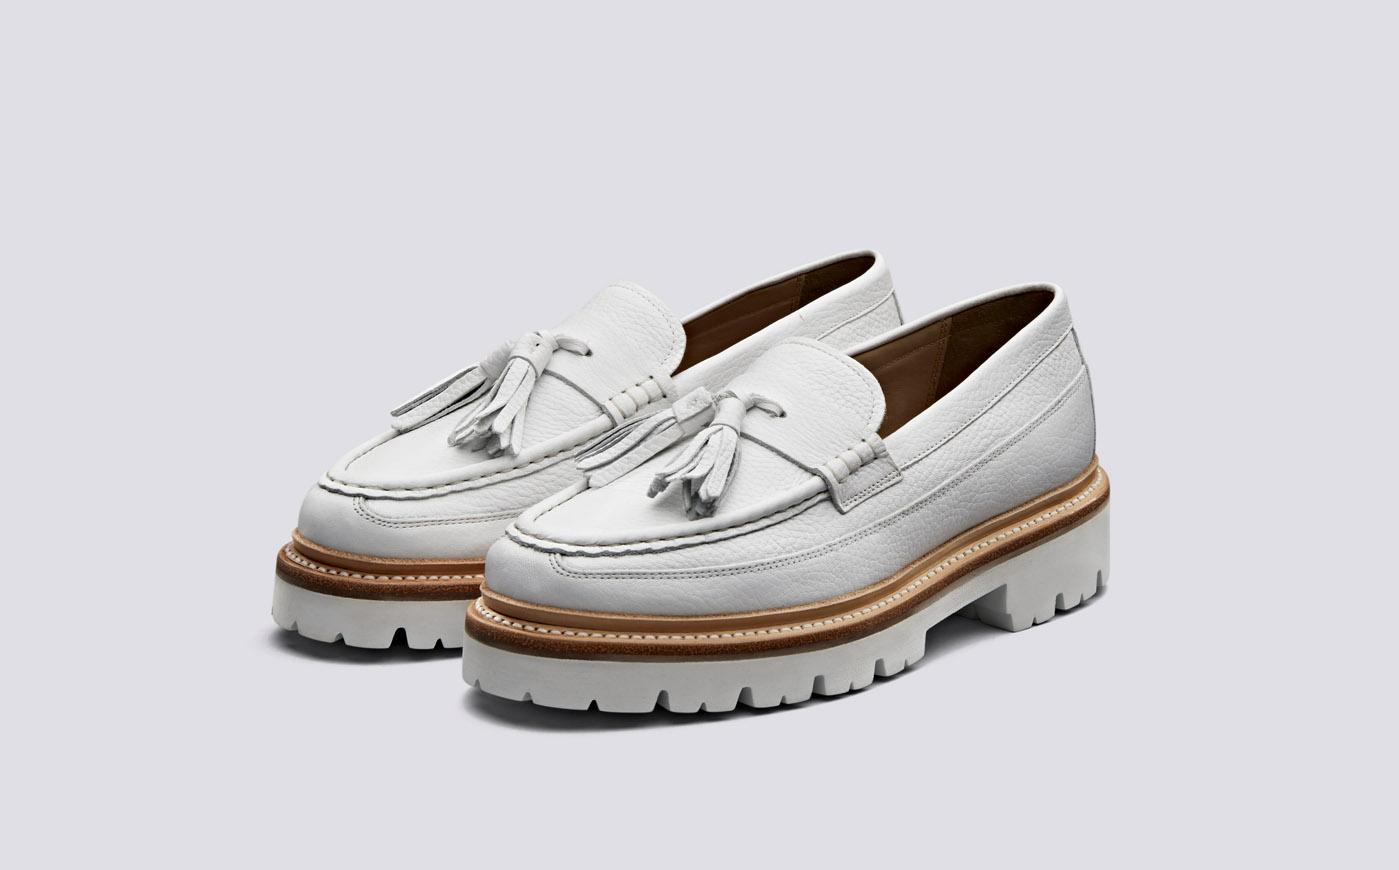 Grenson Bethany Loafers In White Leather On A Commando Sole | Lyst